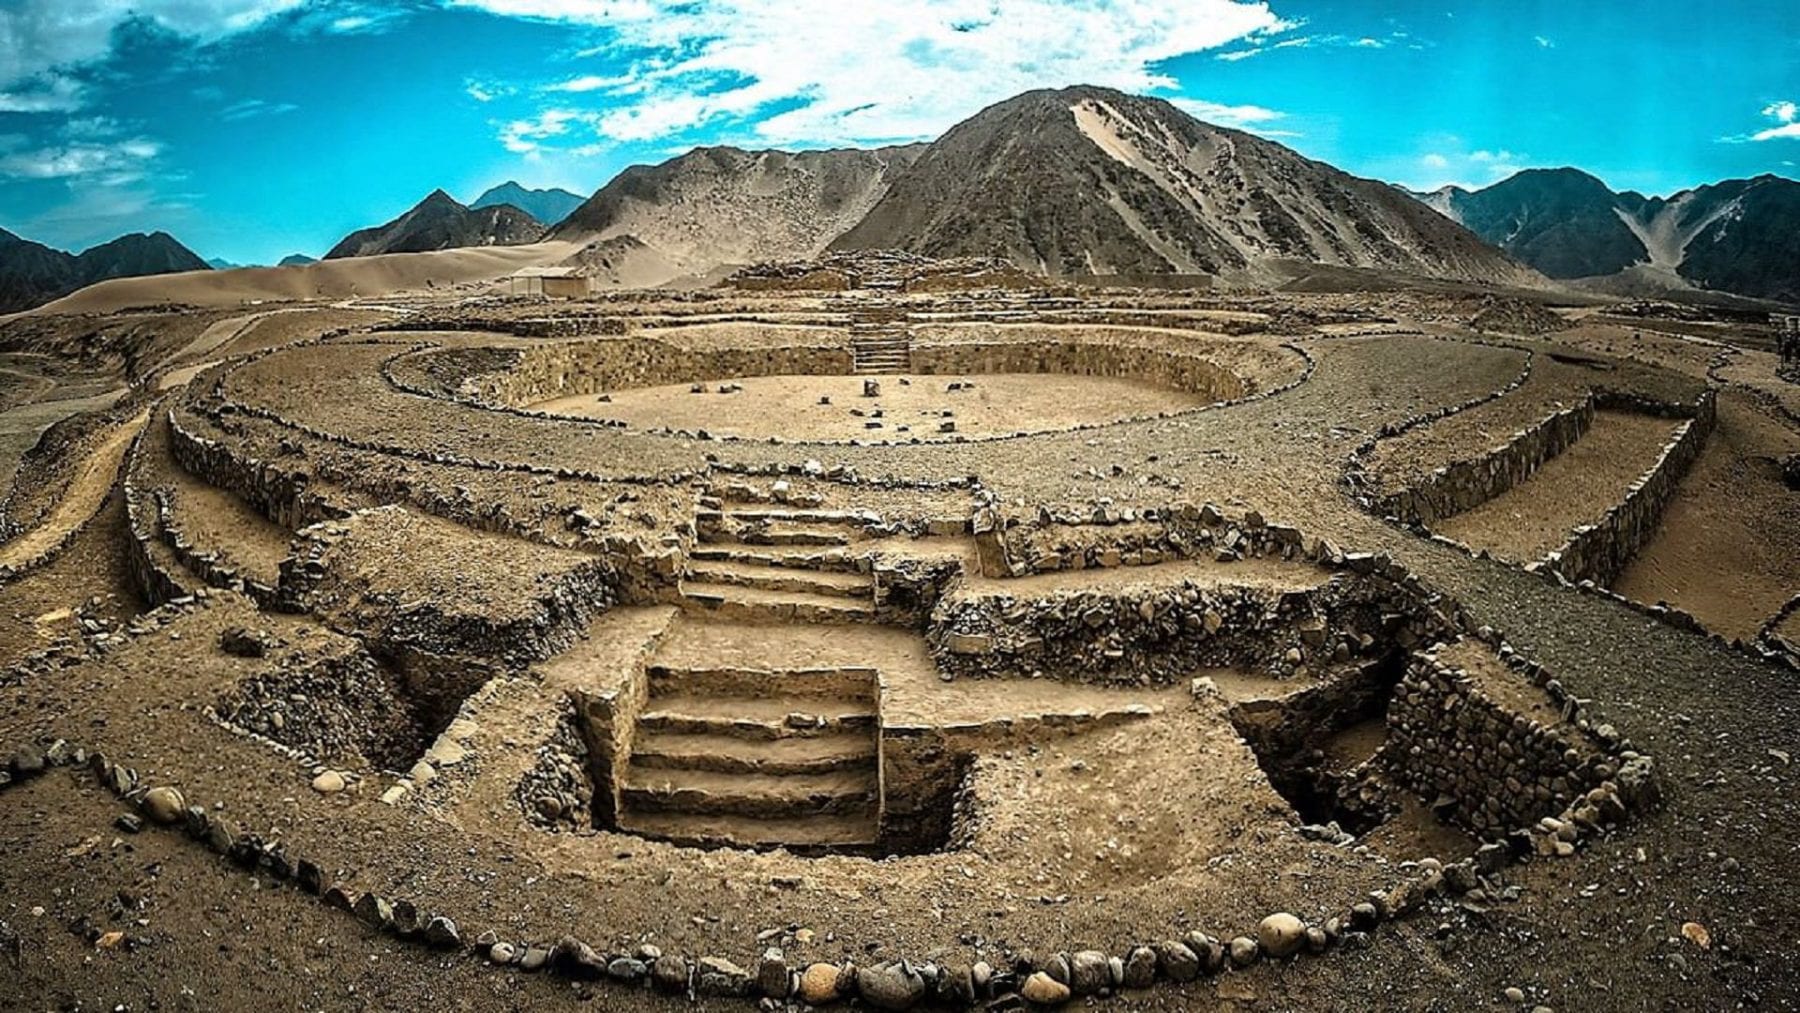 The architectural diversity of Caral is admirable. Credit: Ana Paula Bedoya